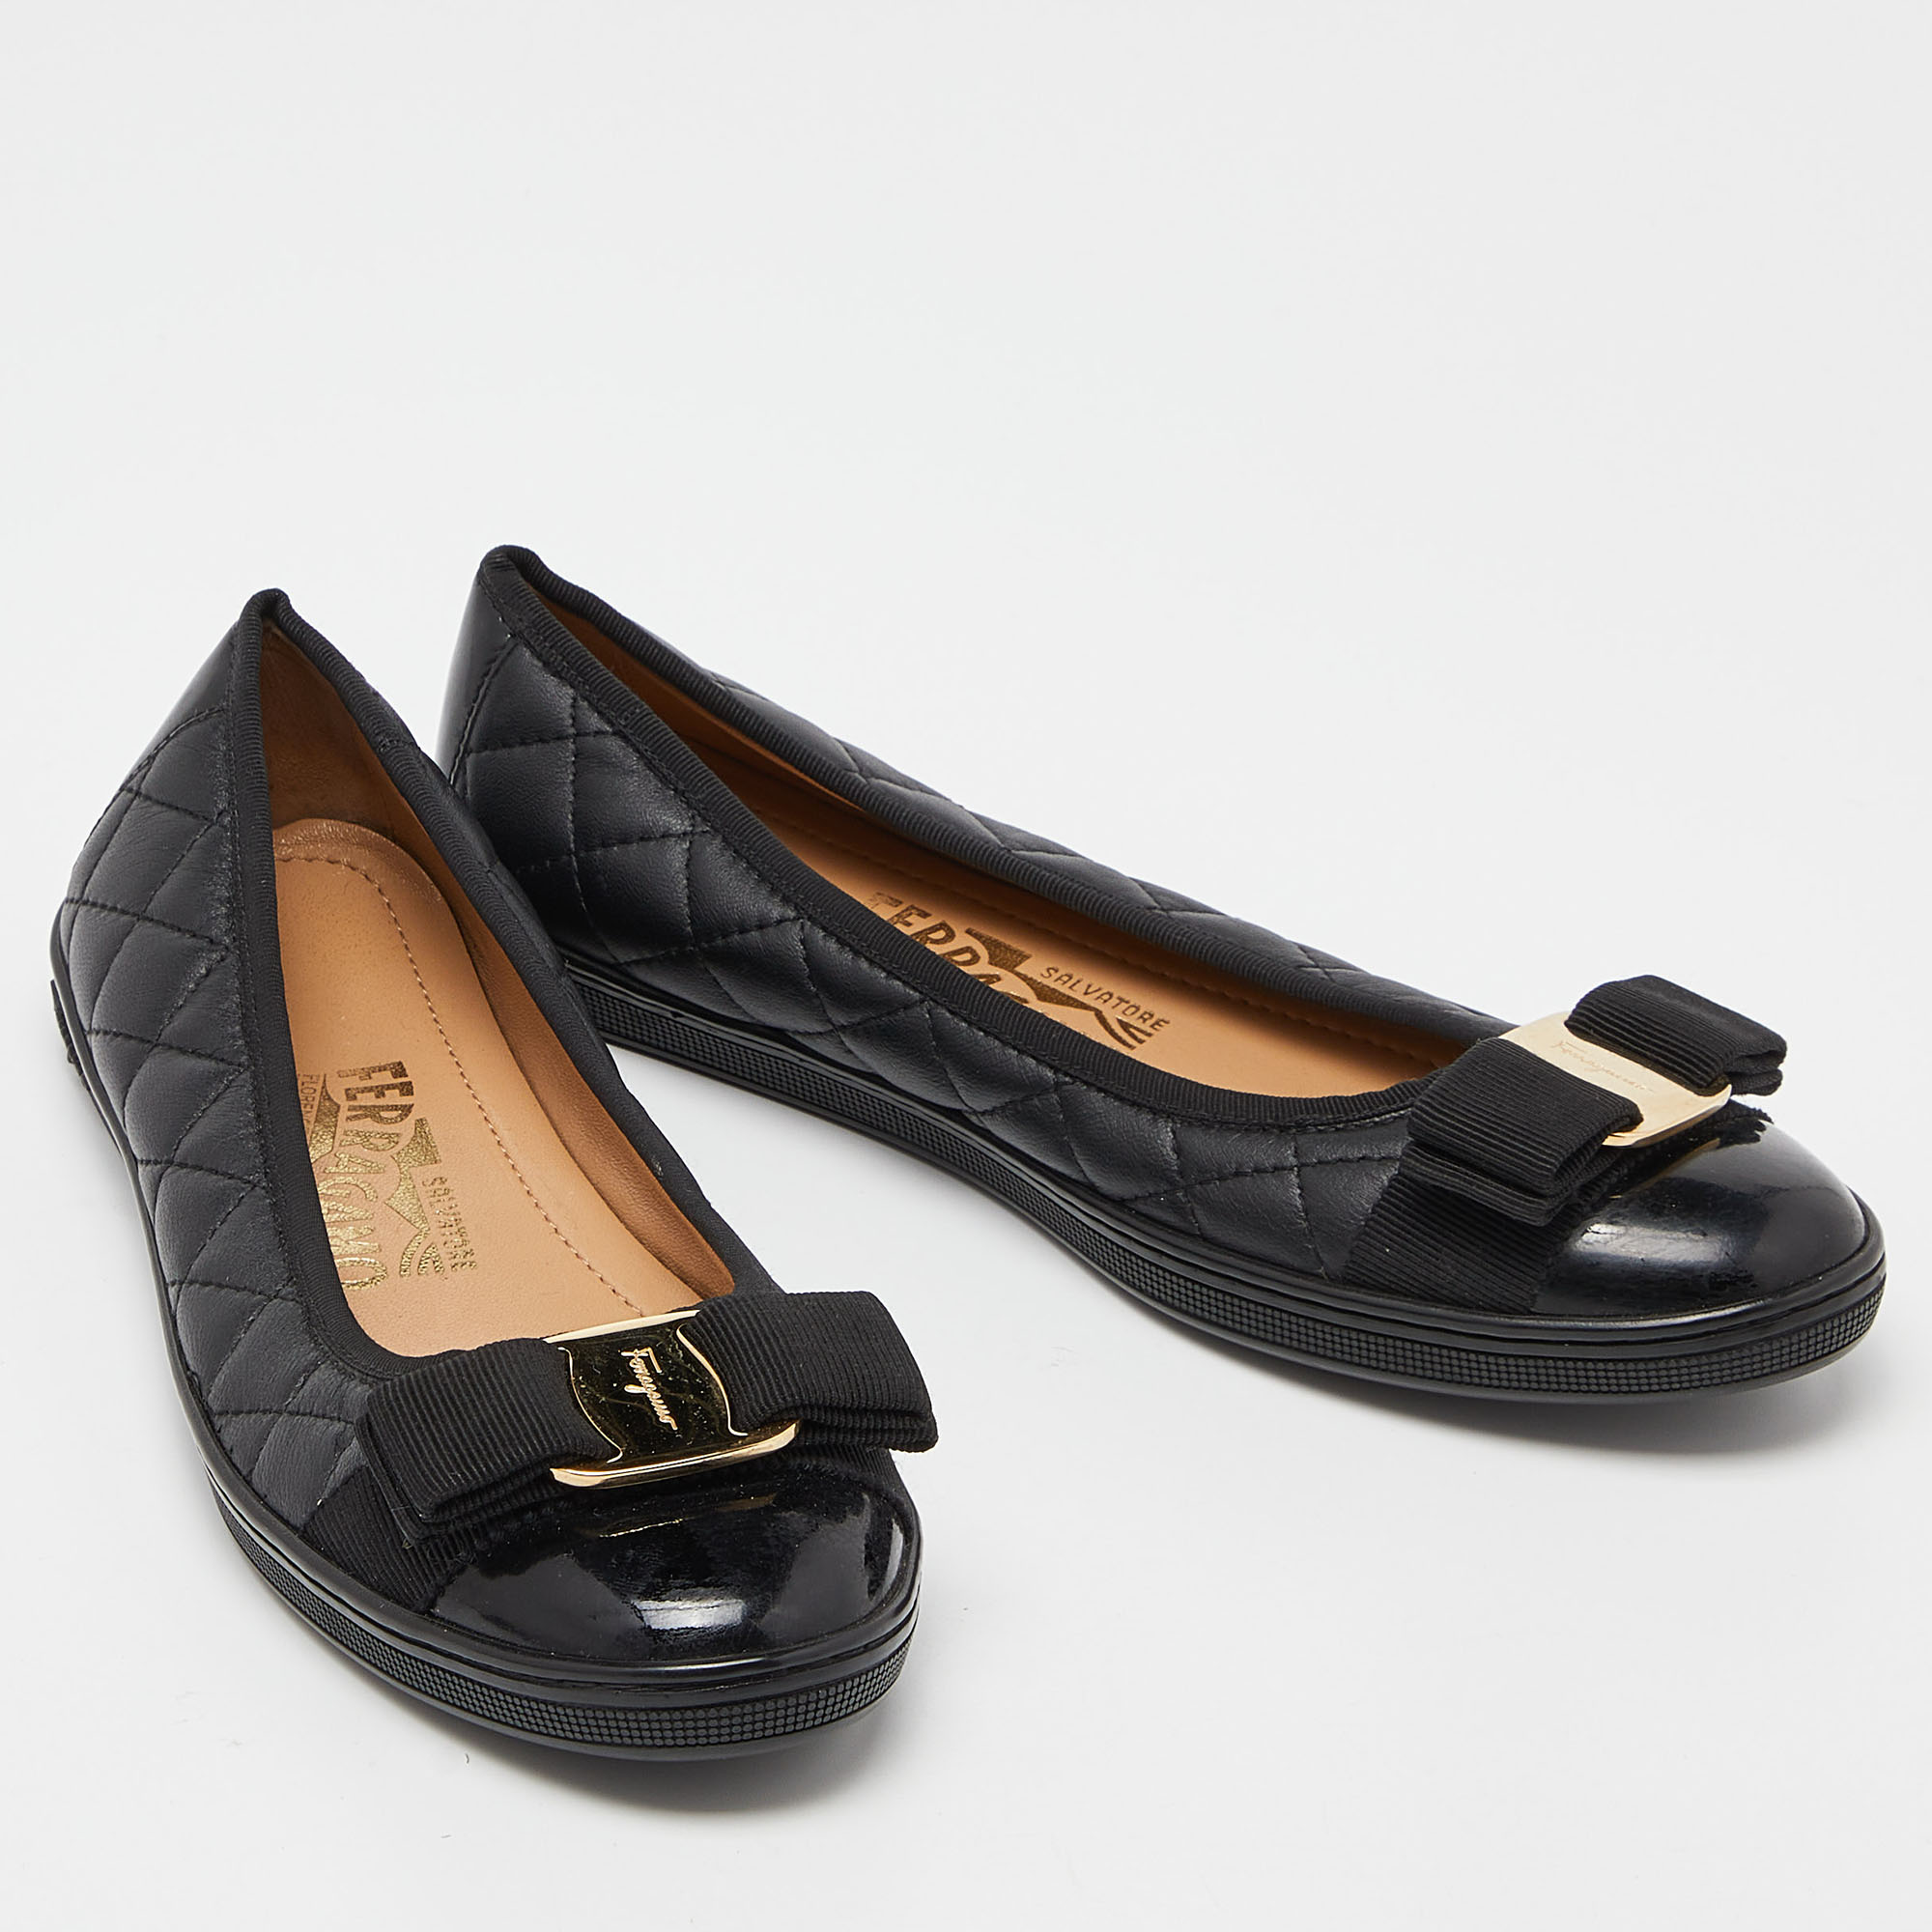 Salvatore Ferragamo Black Quilted Leather And Patent Varina Ballet Flats Size 35.5